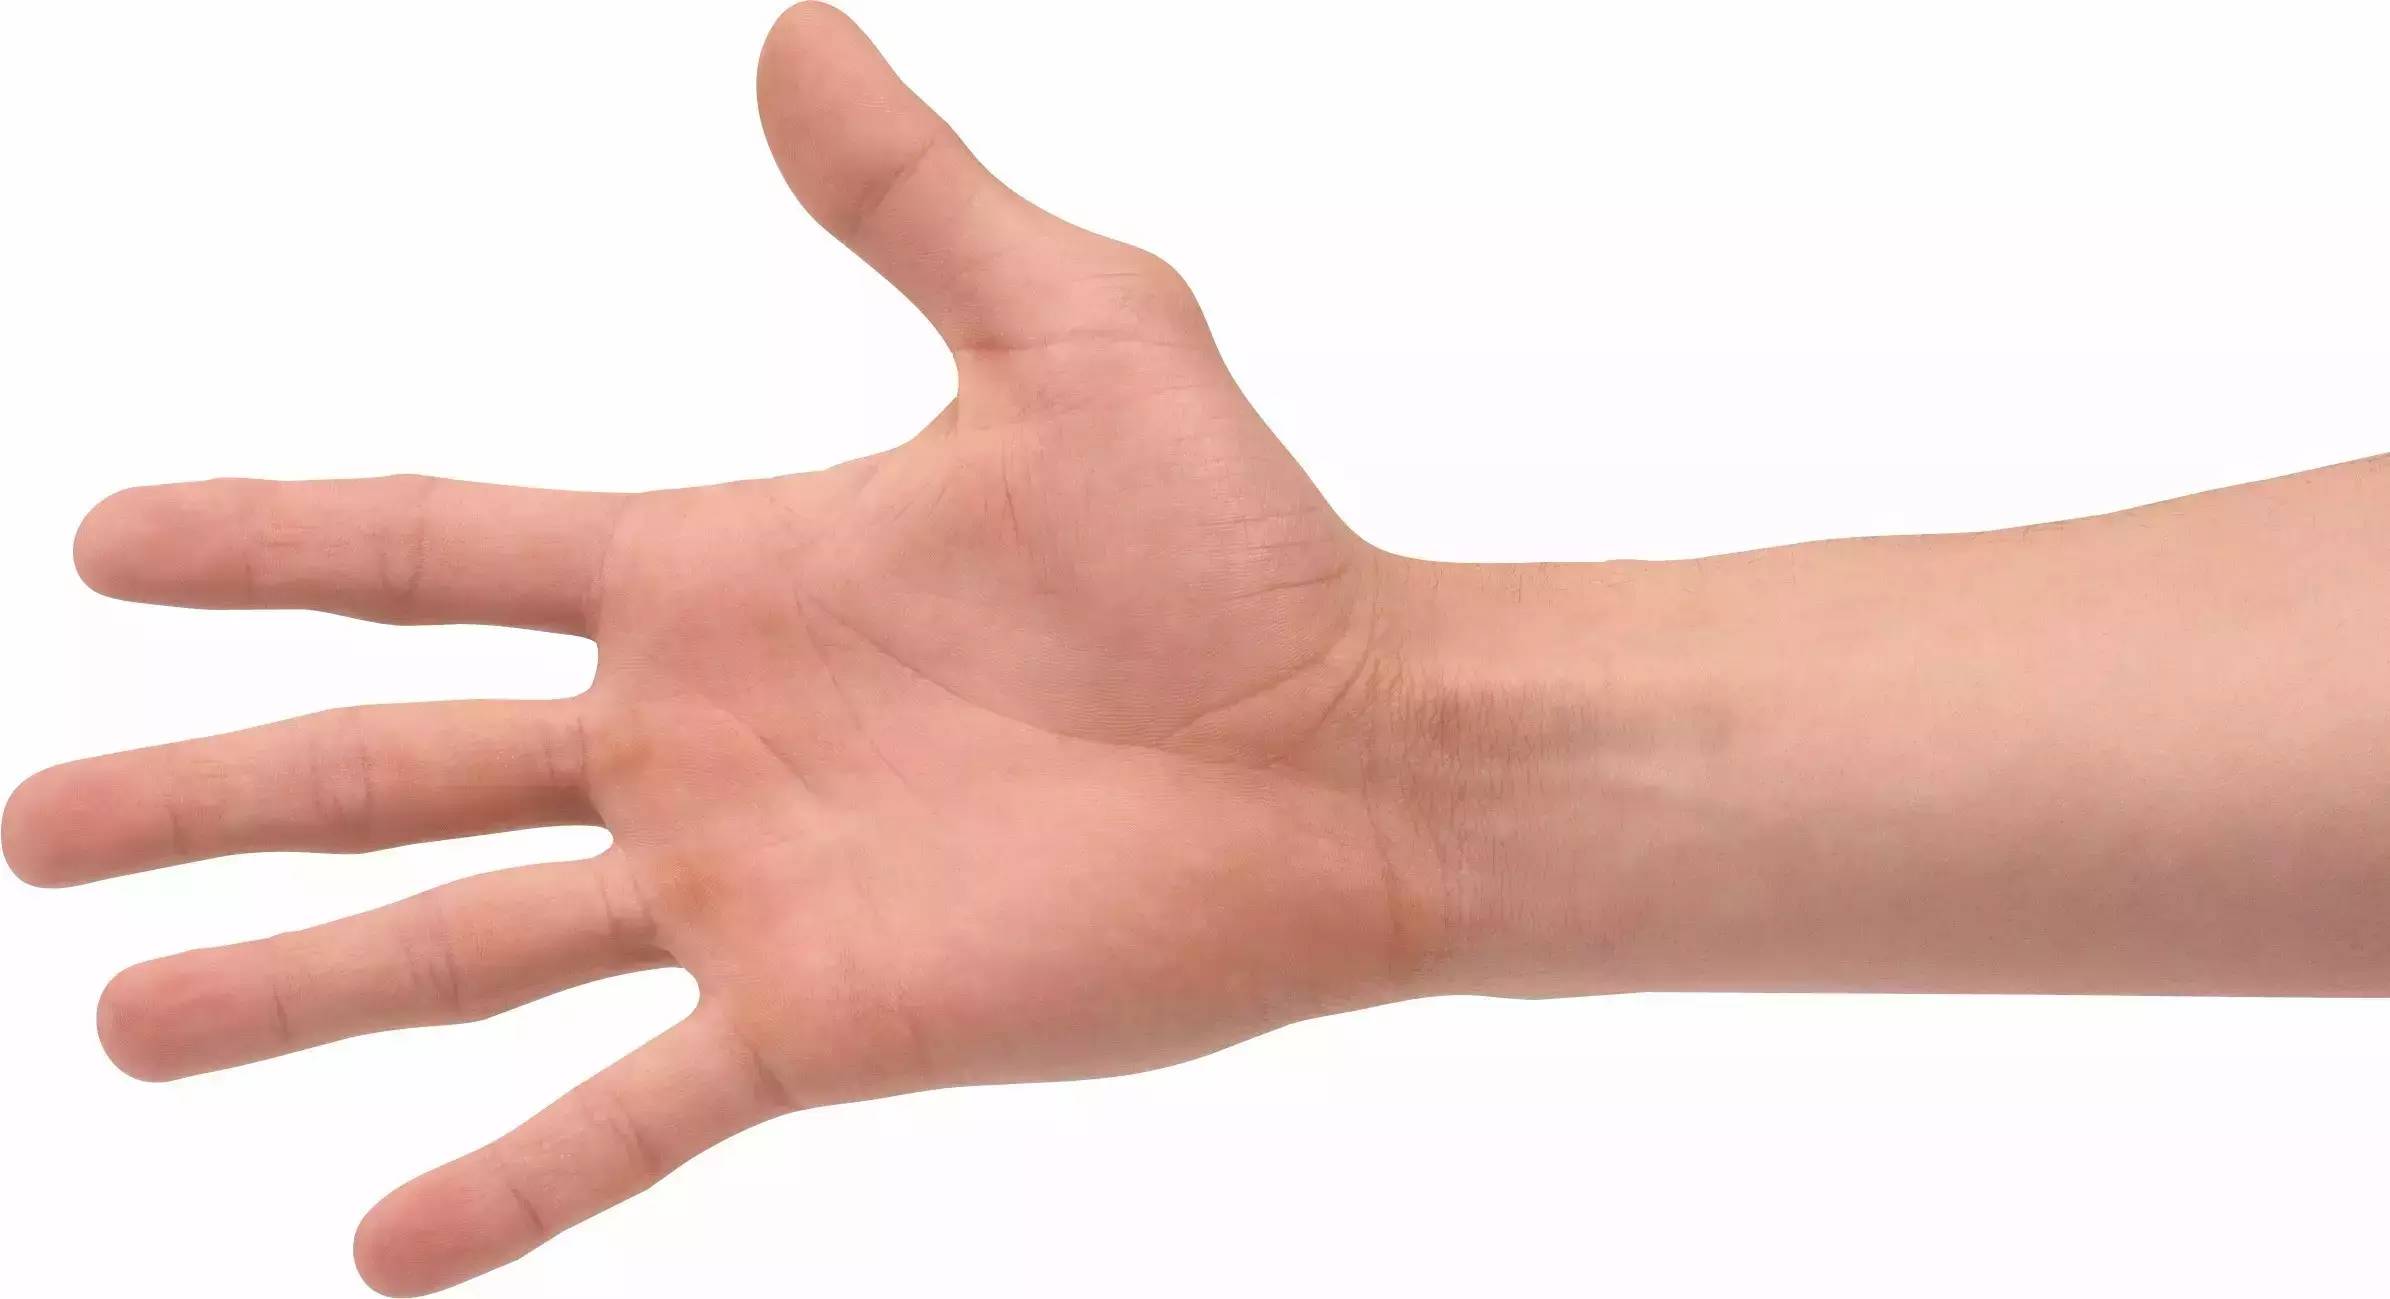 Bean knowledge: the muscle that controls the finger is not on the finger.